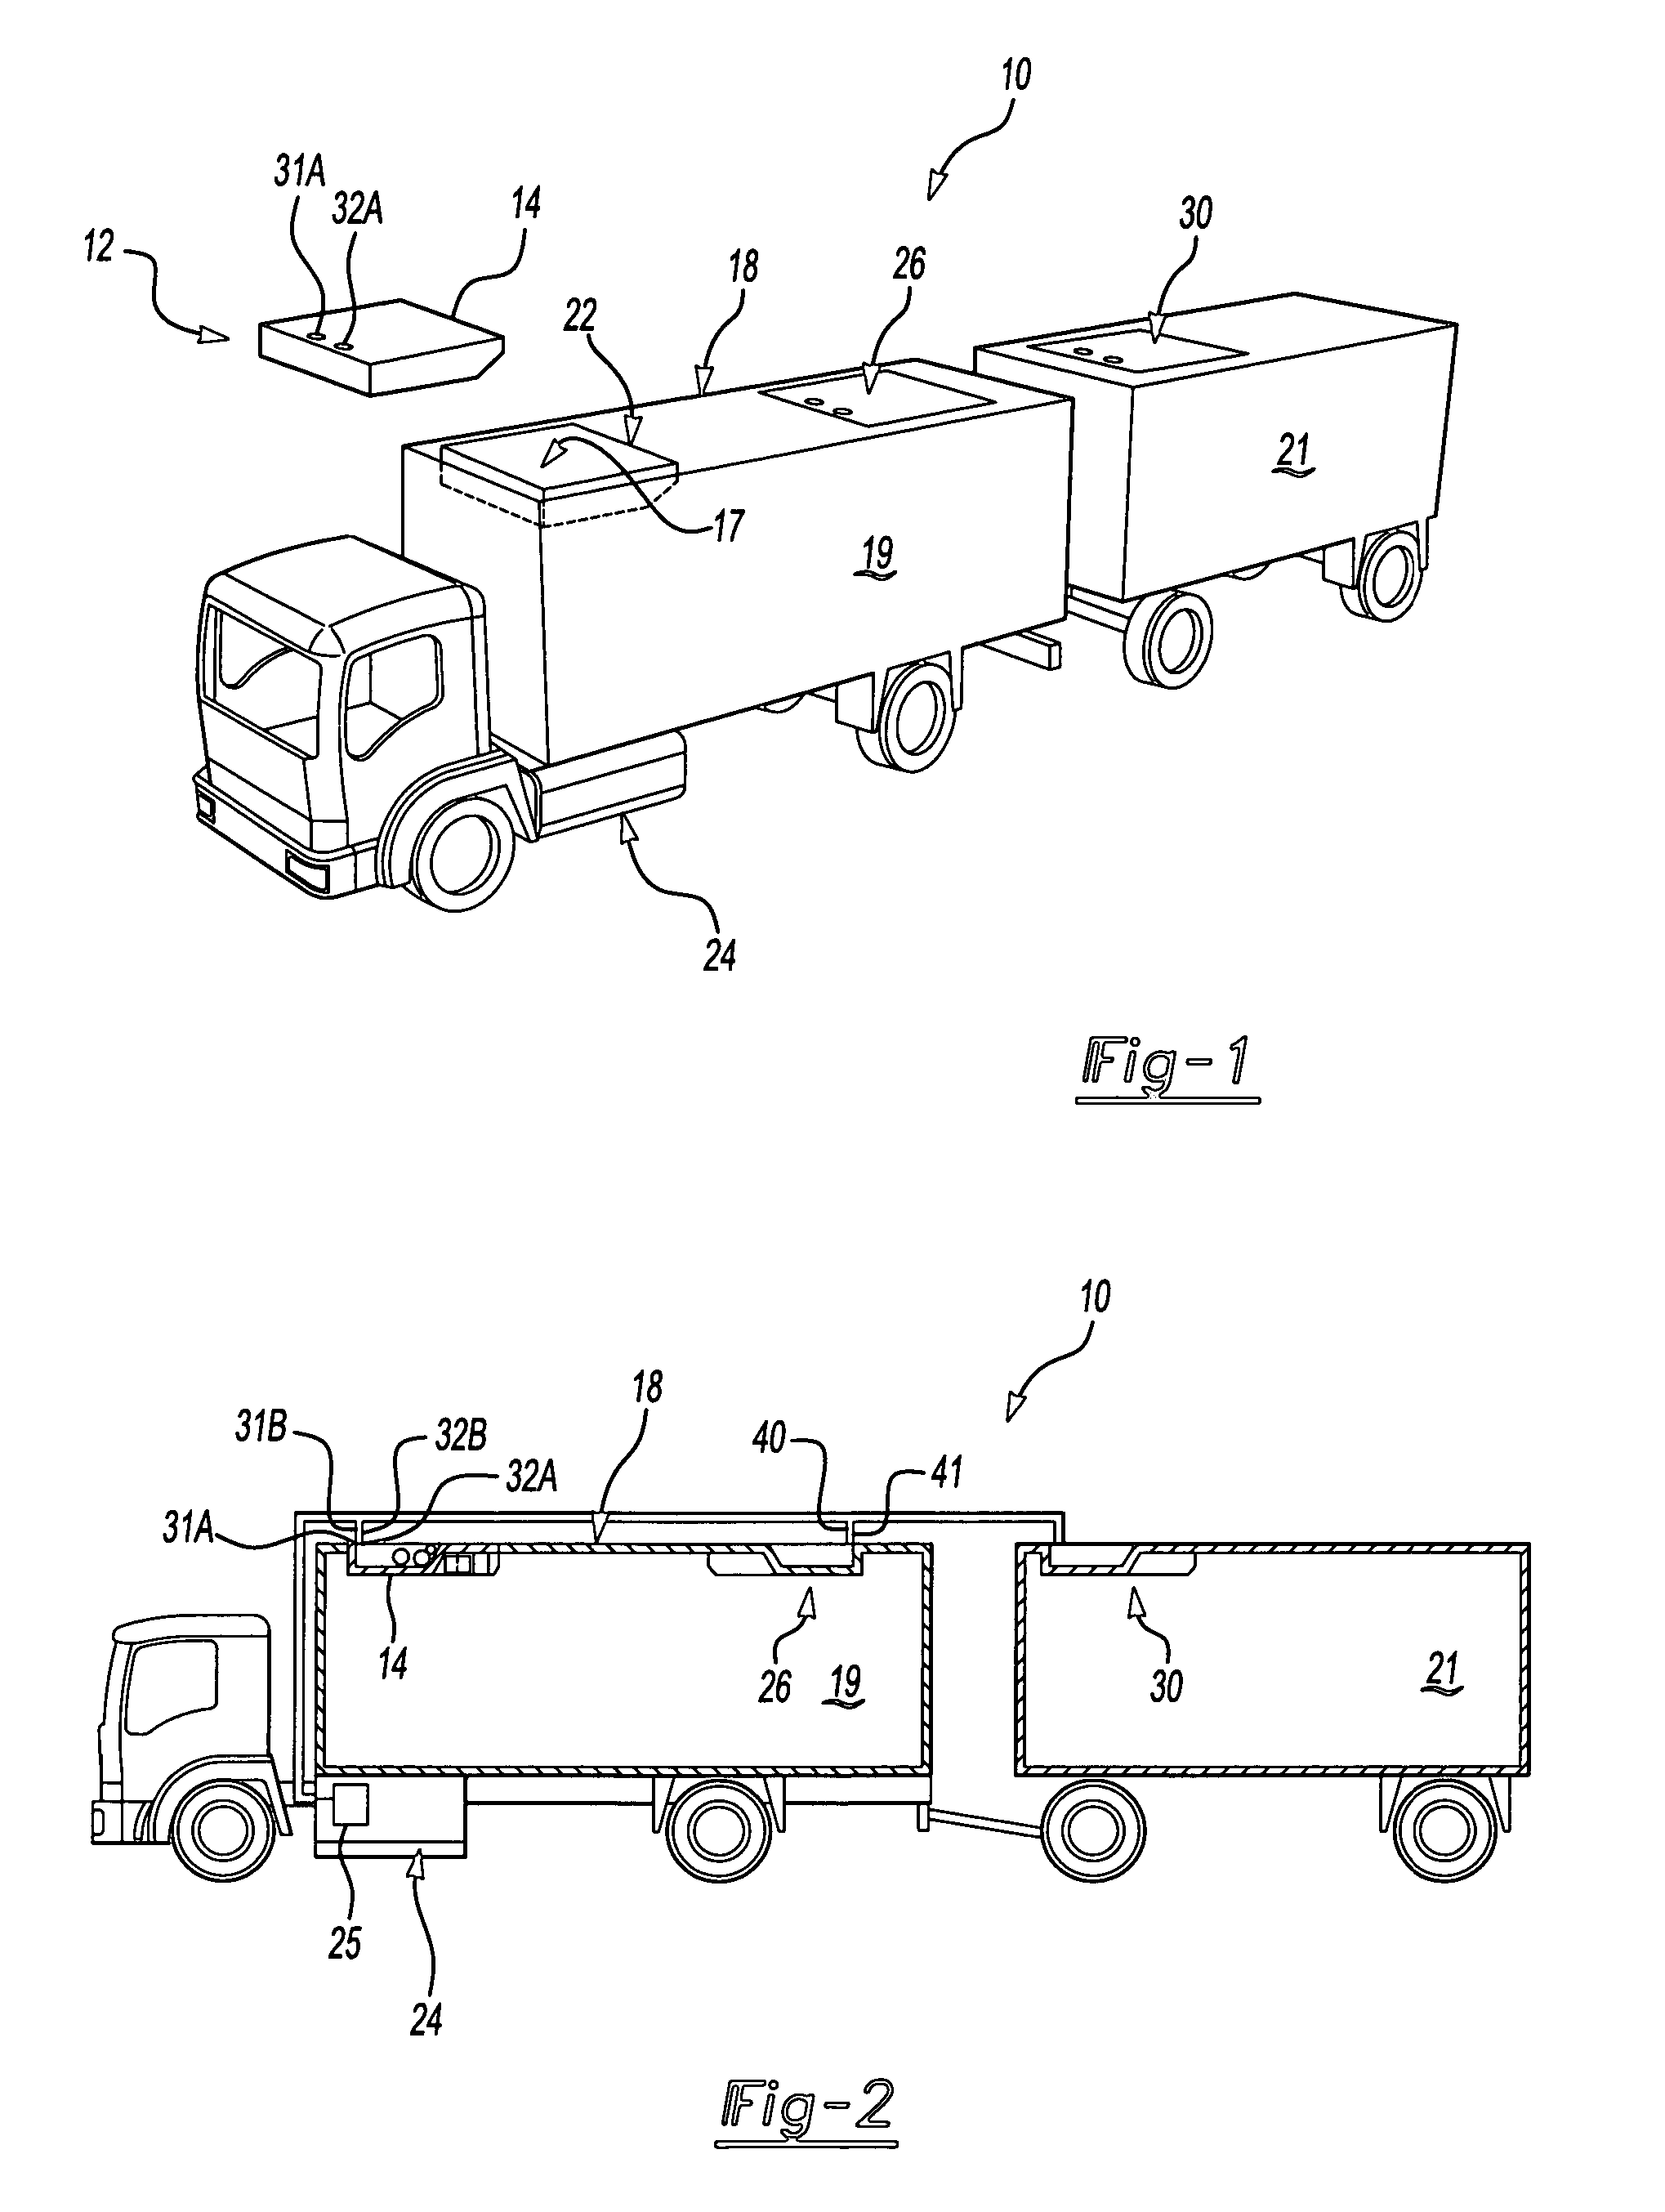 Self-contained refrigeration unit